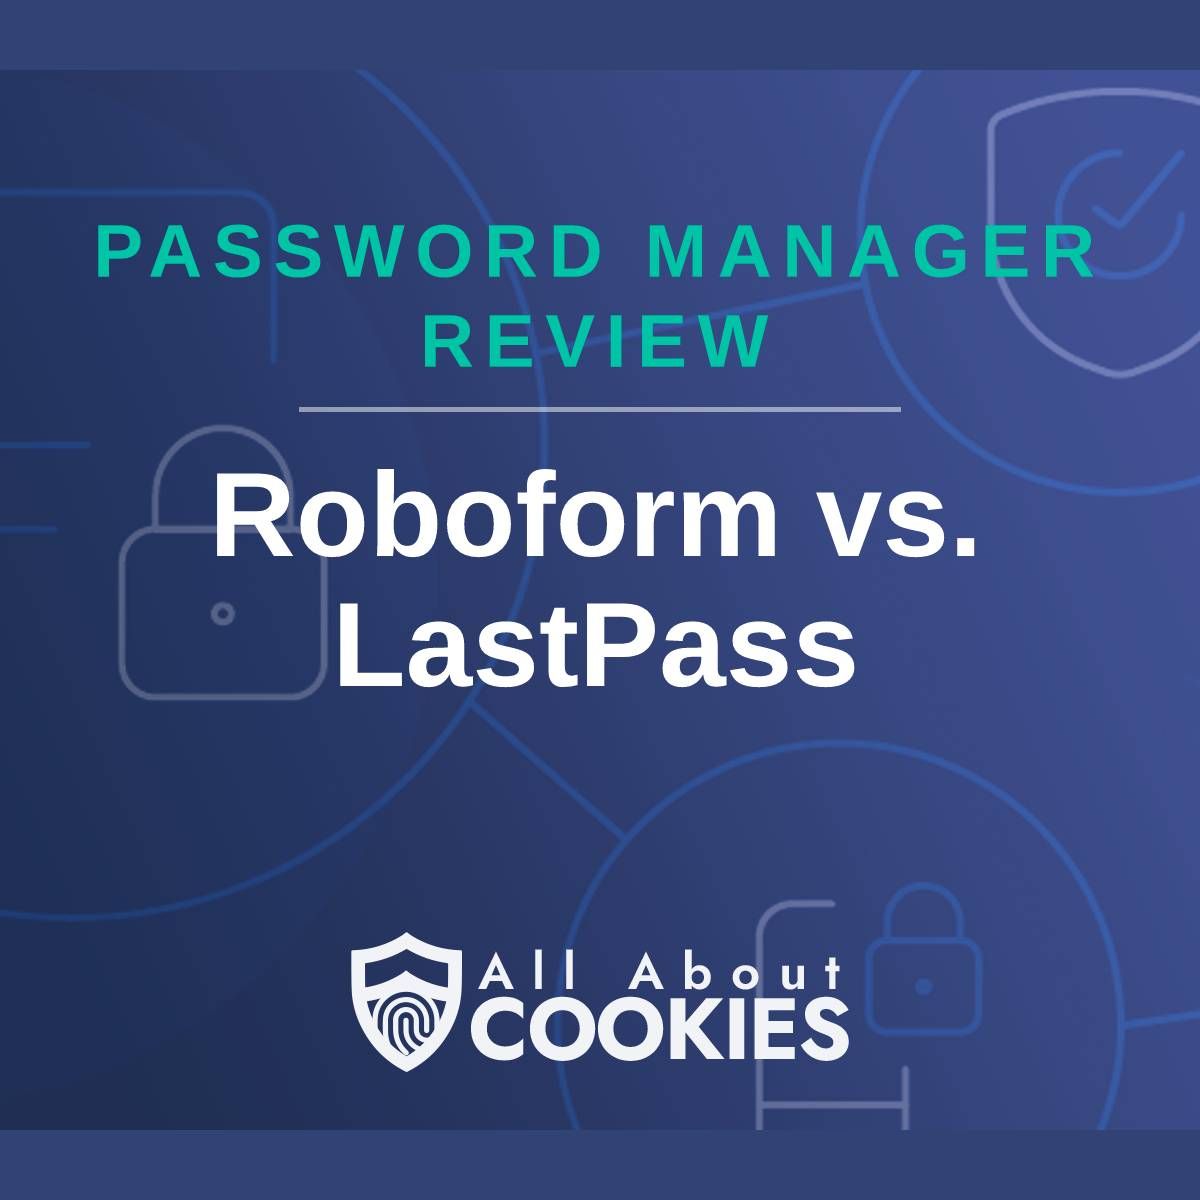 A blue background with images of locks and shields with the text &quot;Password Manager Review Roboform vs. LastPass&quot; and the All About Cookies logo. 